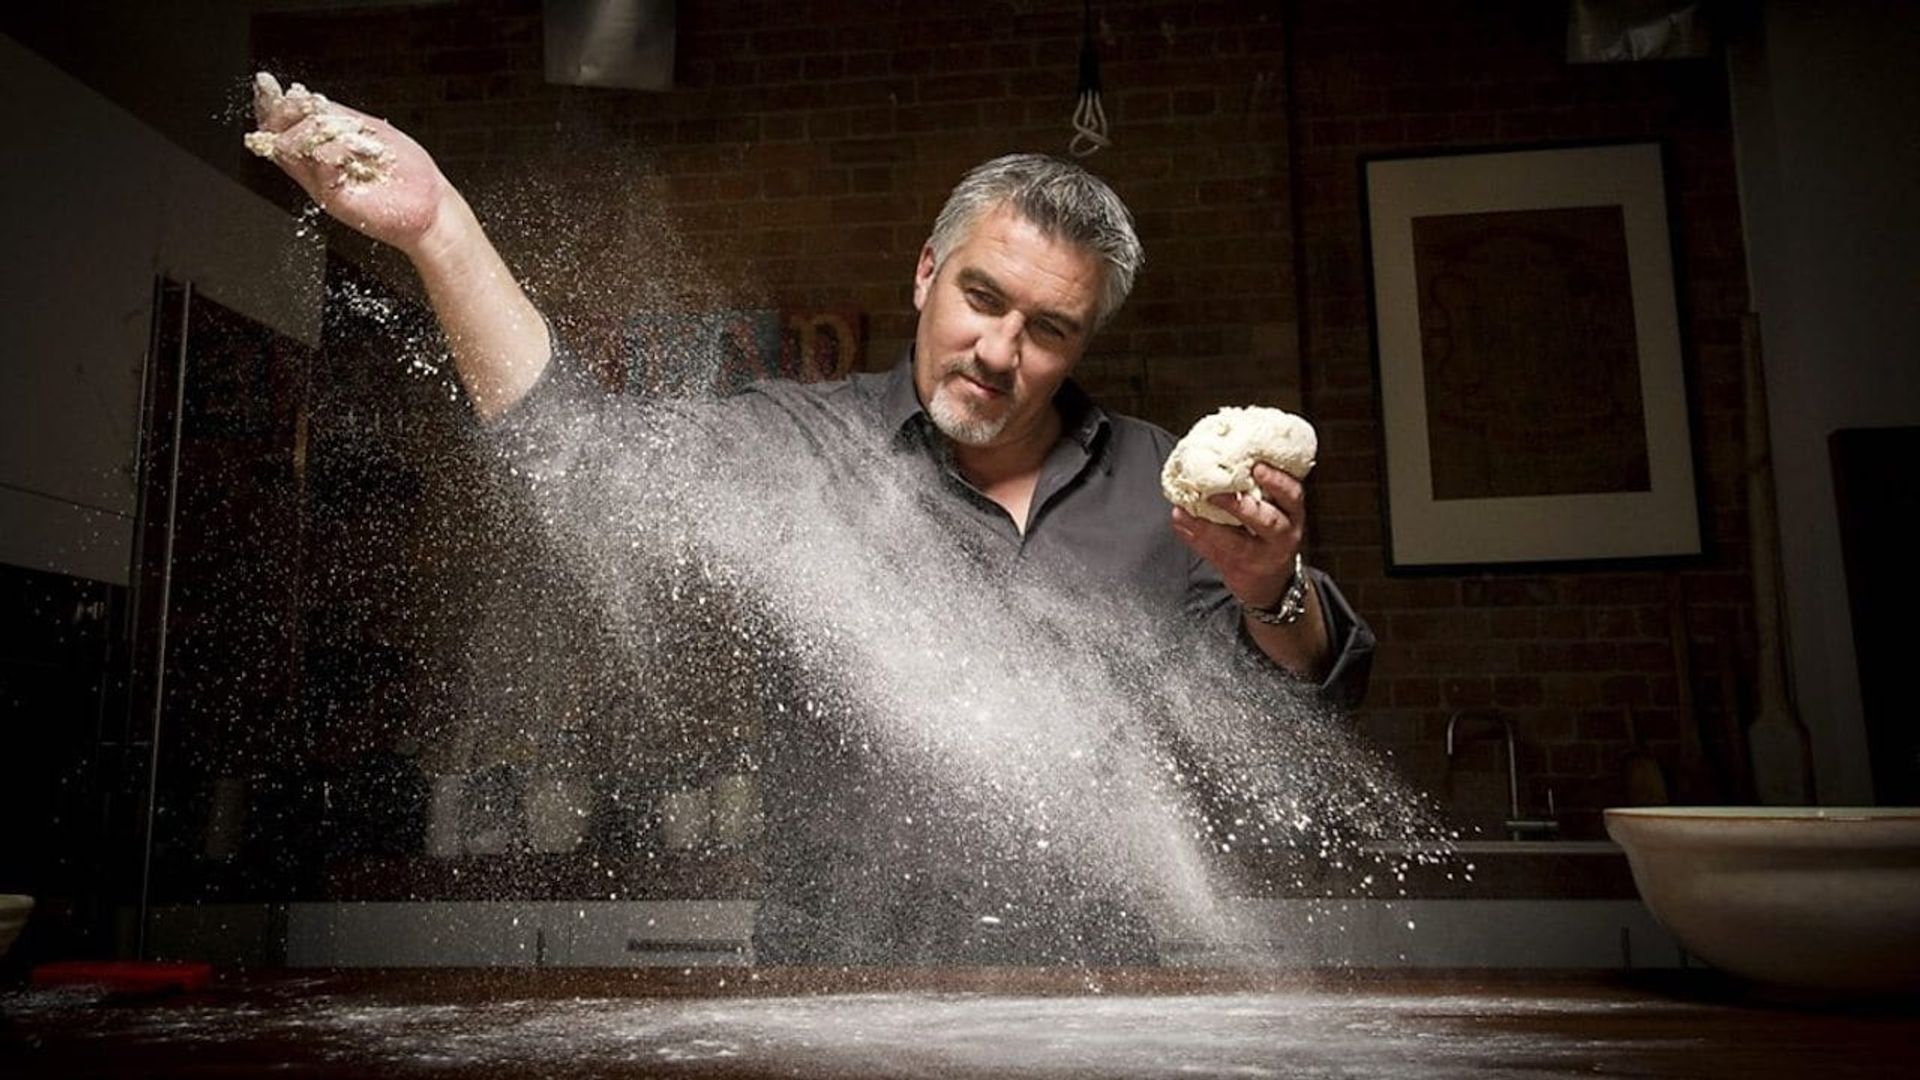 Paul Hollywood's Bread background